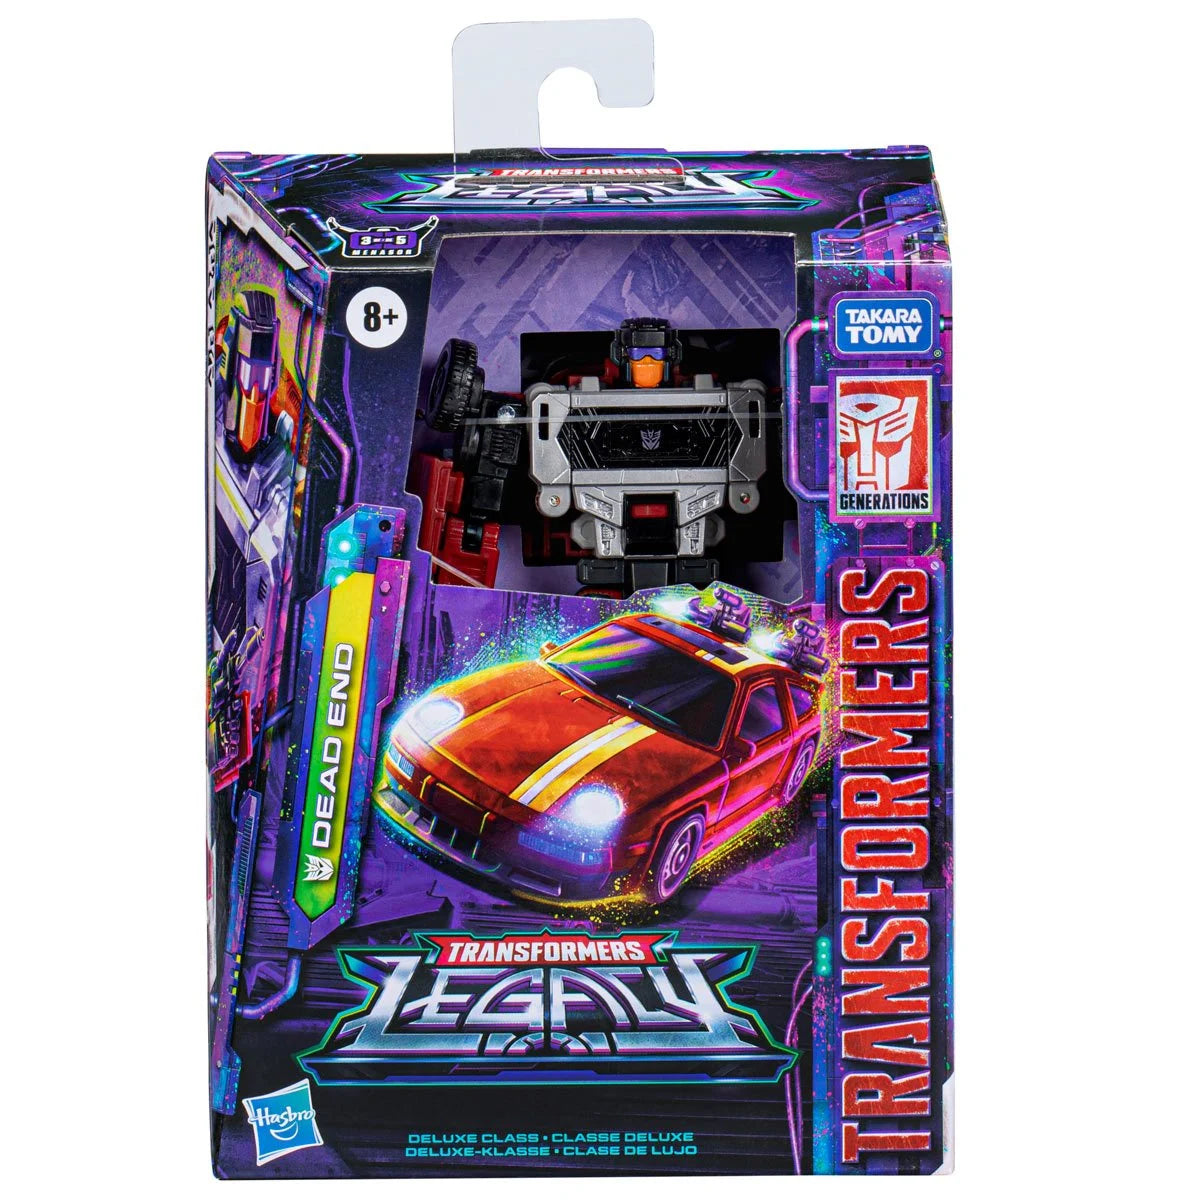 Transformers Generations Legacy Deluxe Dead End Hasbro